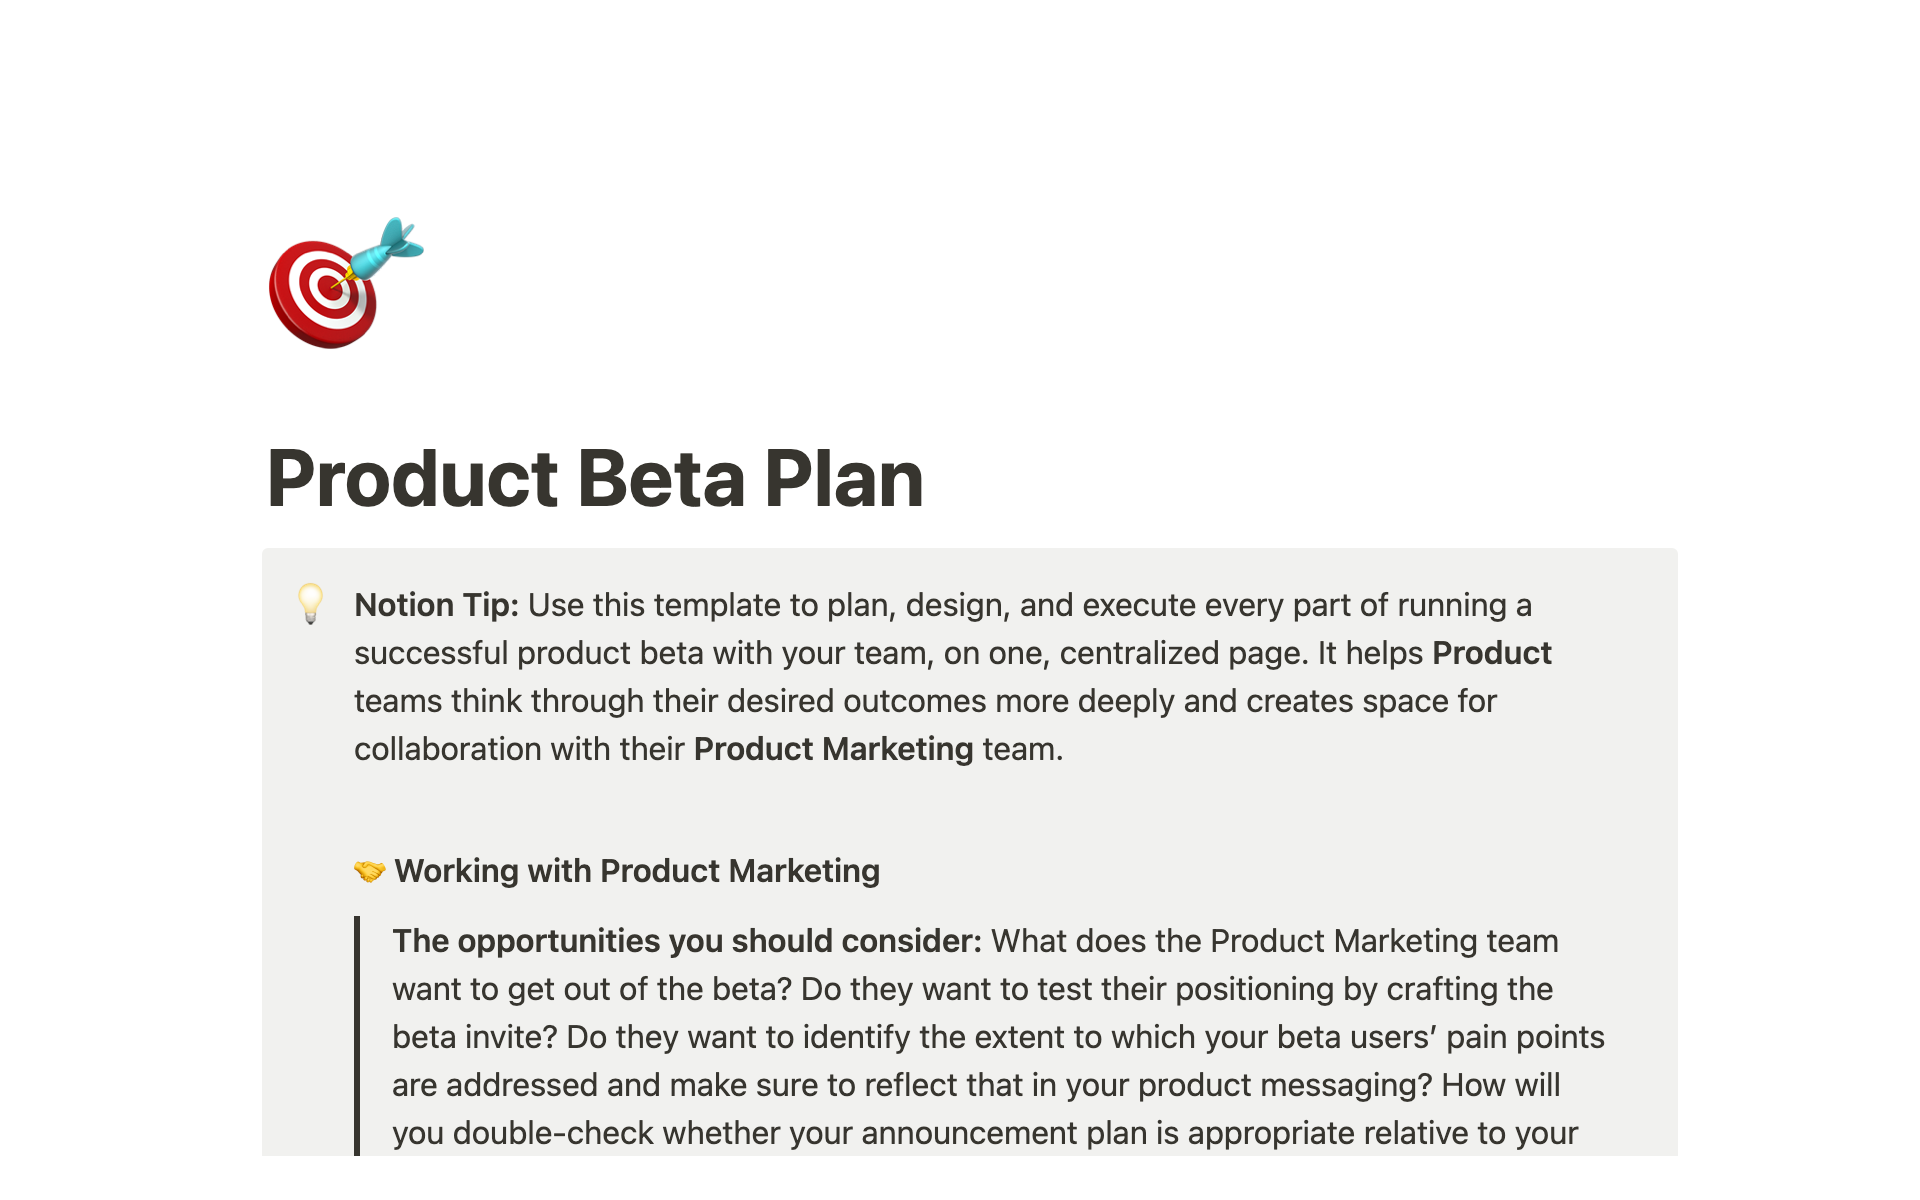 This template helps Product teams, and startups, think through their desired outcomes more deeply, and creates space for collaboration with their Product Marketing team.